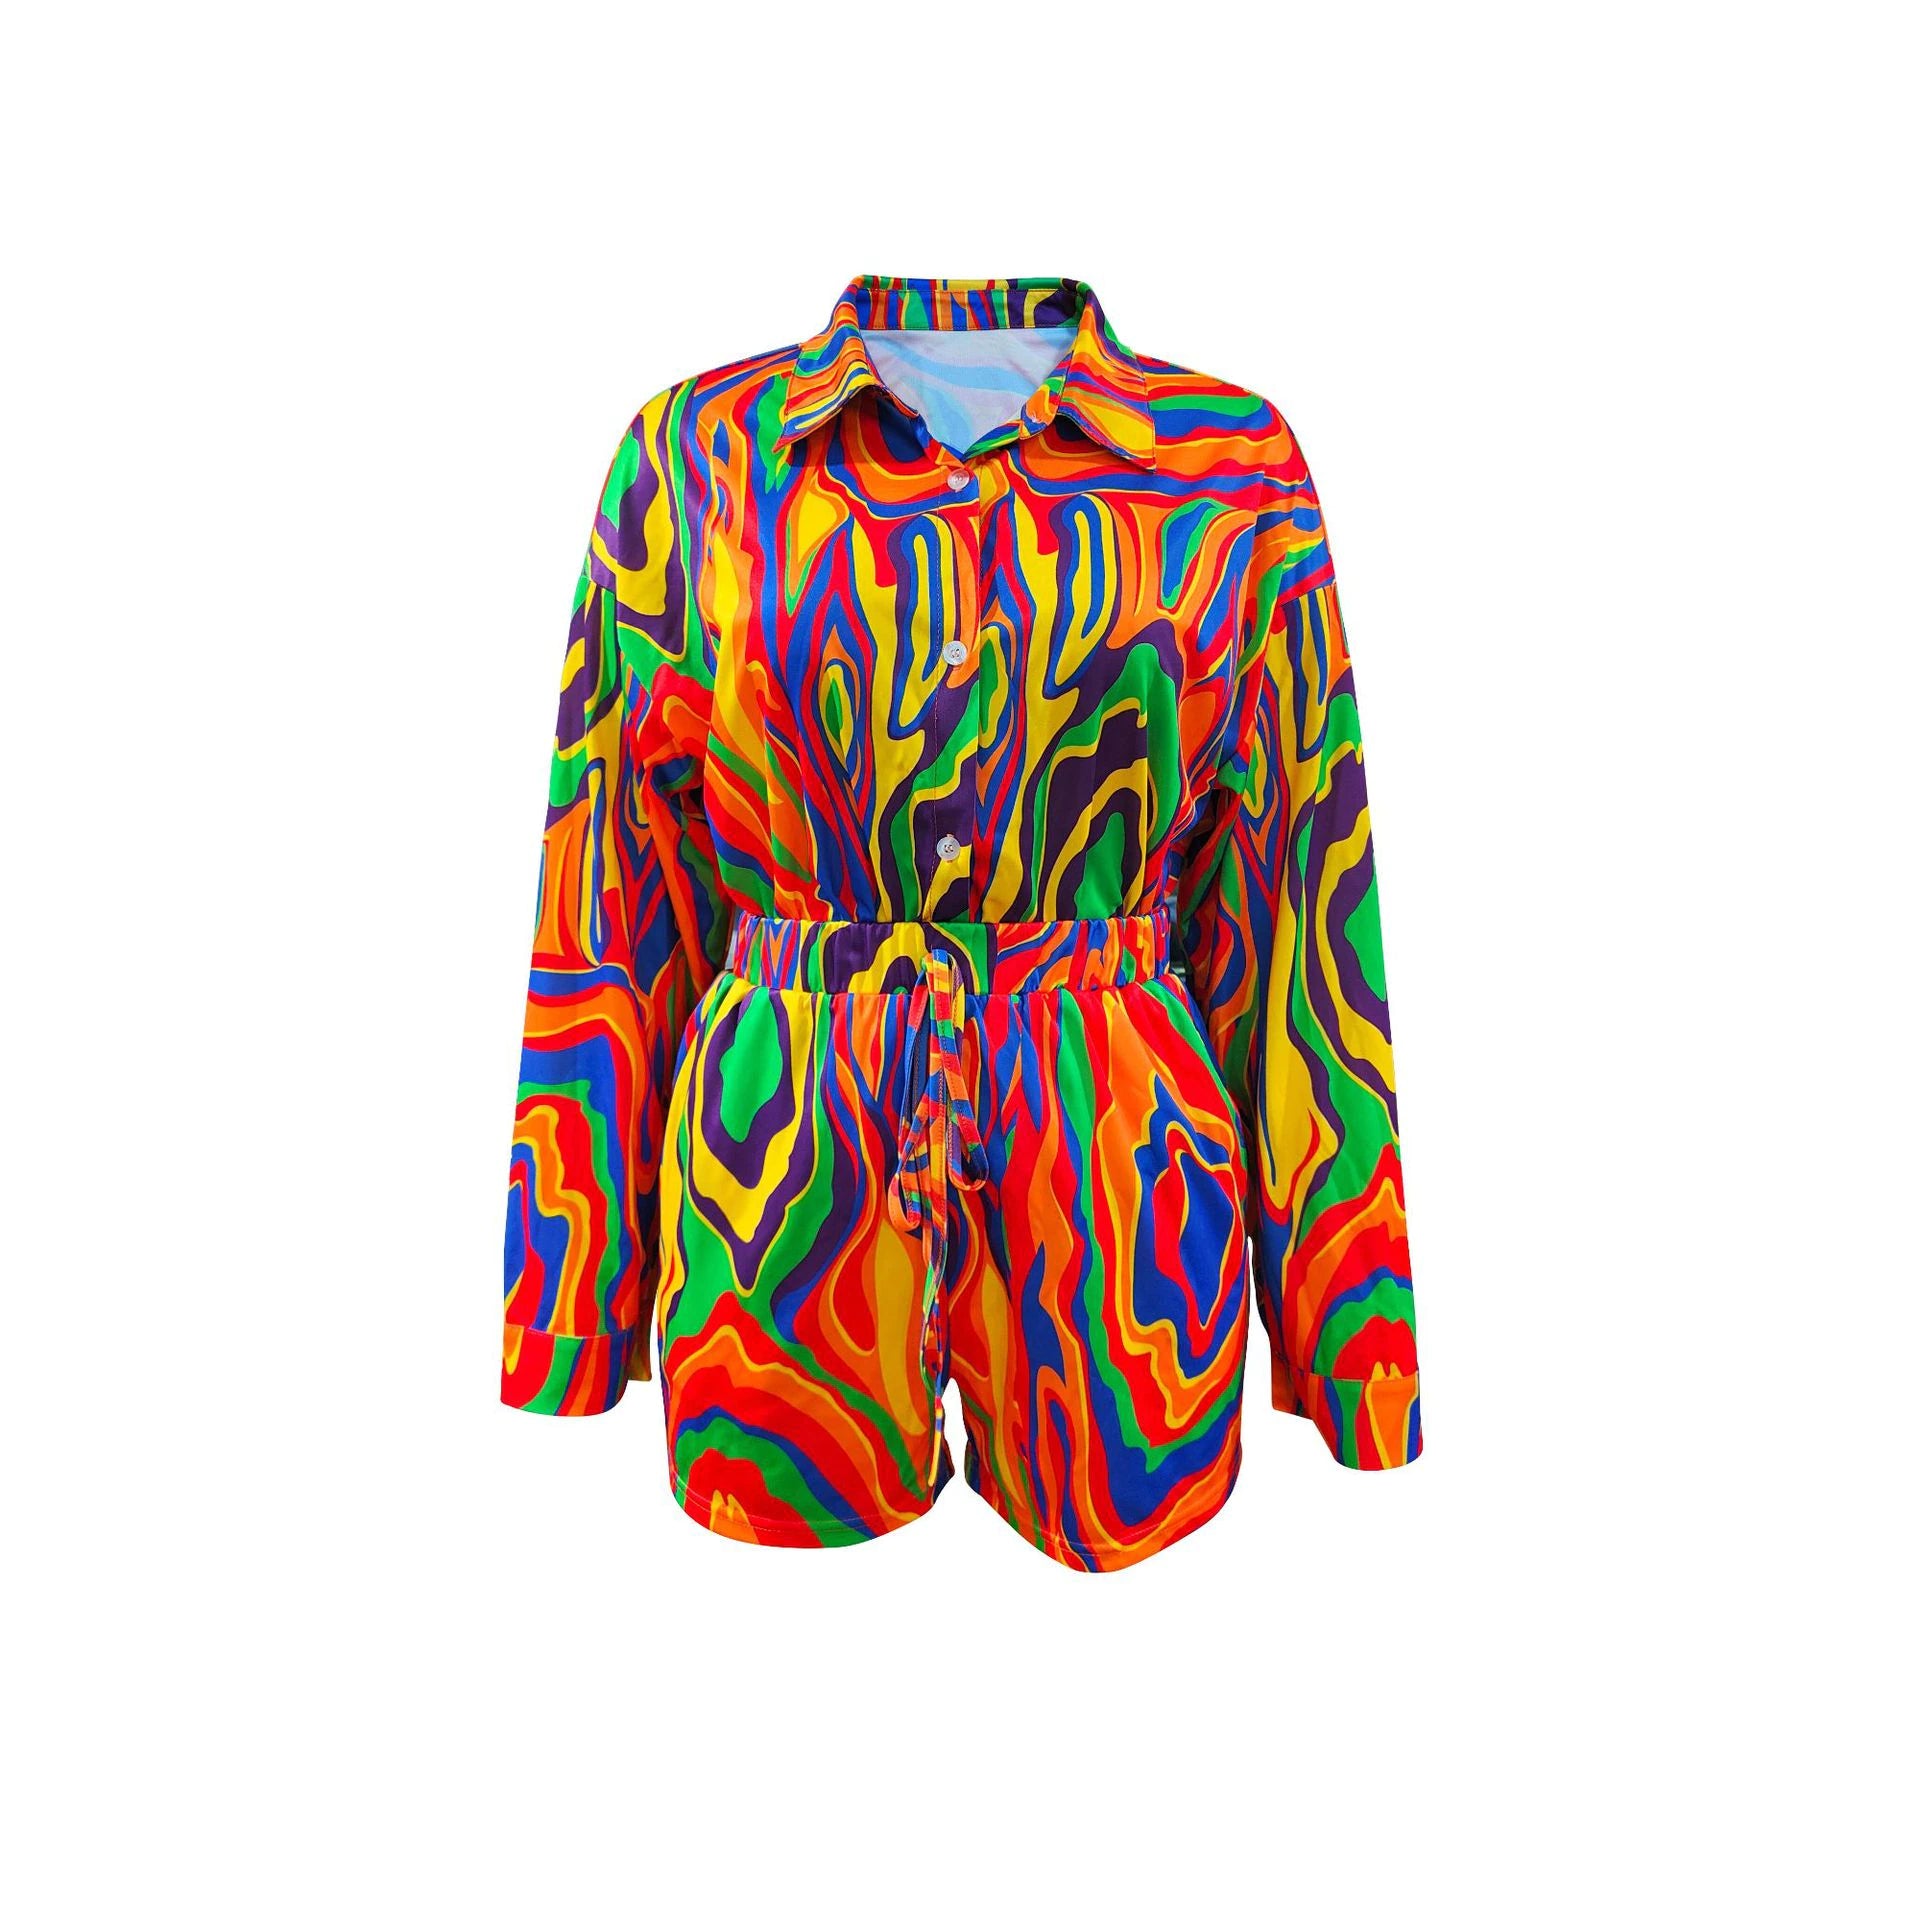 Casual Tie Dye Printed Lapel Long Sleeve Shirt Tops and Shorts Suit